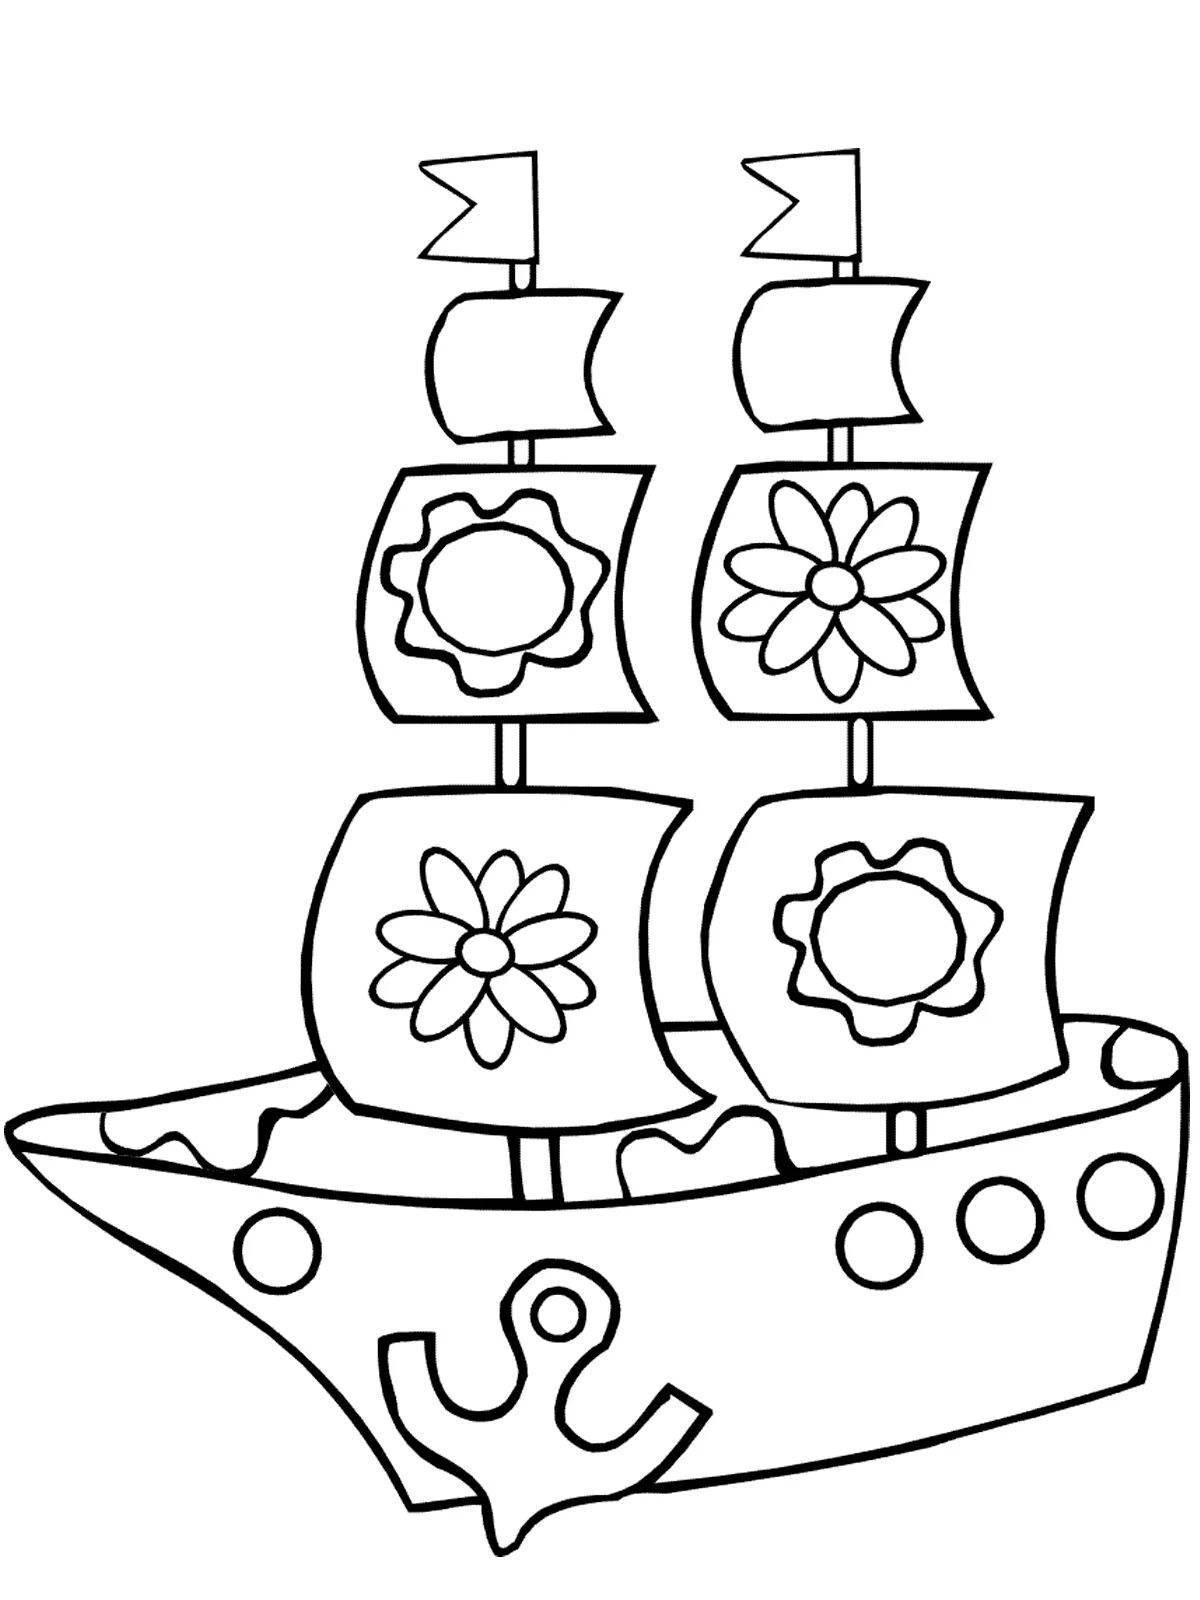 Sailboat Coloring Page for Toddlers